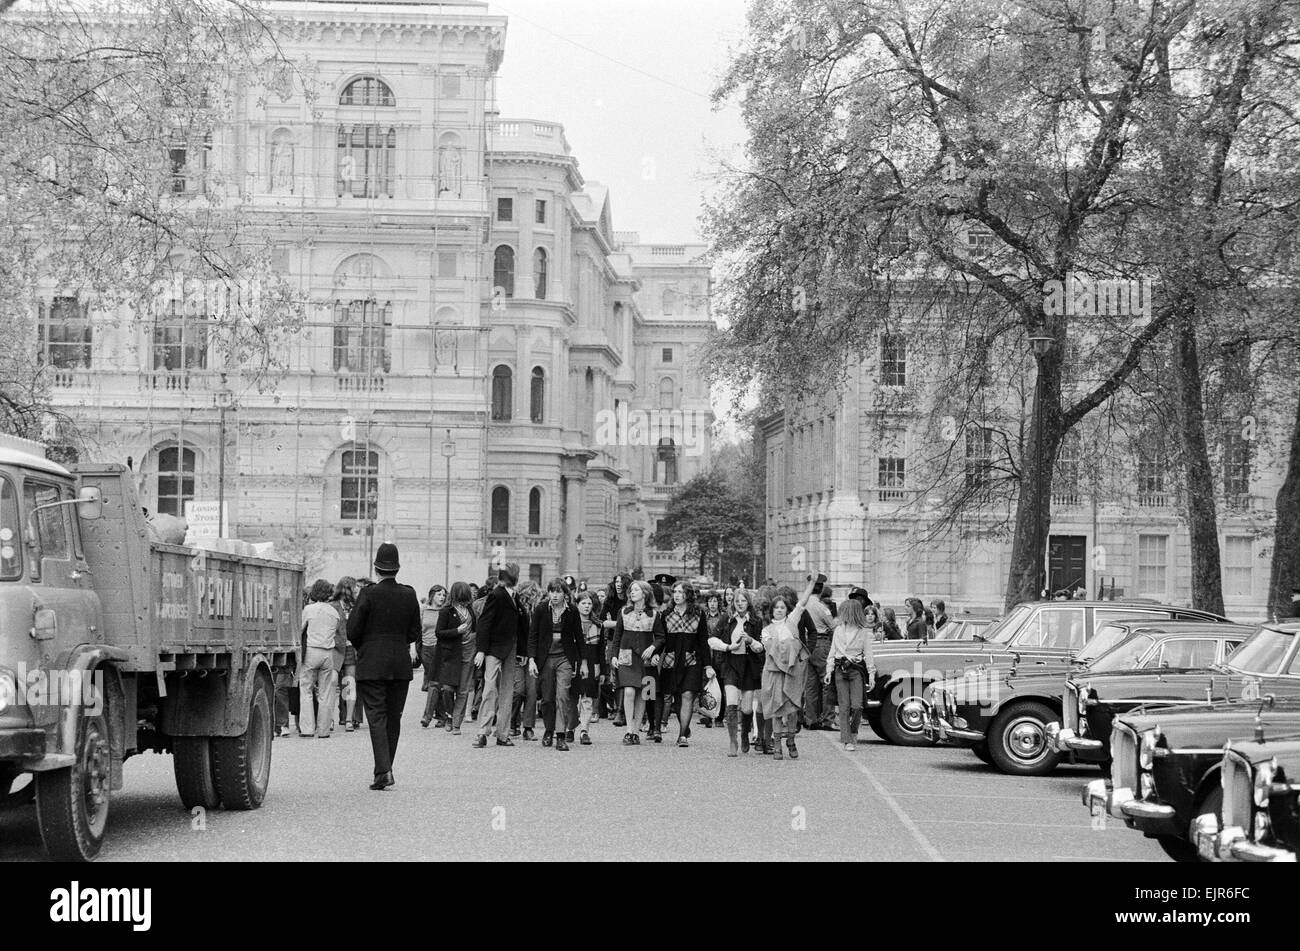 Students Demonstration in London 17th May 1972. A march of 10,000 pupils was organised by the Schools' Action Union and the National Unions of School Students. With the absence of student leader Steve Finch from Rutherford School in Marylebone (arrested several days earlier), and with no real leadership, the event started with confusion with half of the pupils marching to Hyde Park and half marching along the South Bank to County Hall chanting 'attack the pigs' and 'we want a riot'. Eventually, the march headed to Trafalgar Square, where it fizzled out. Stock Photo